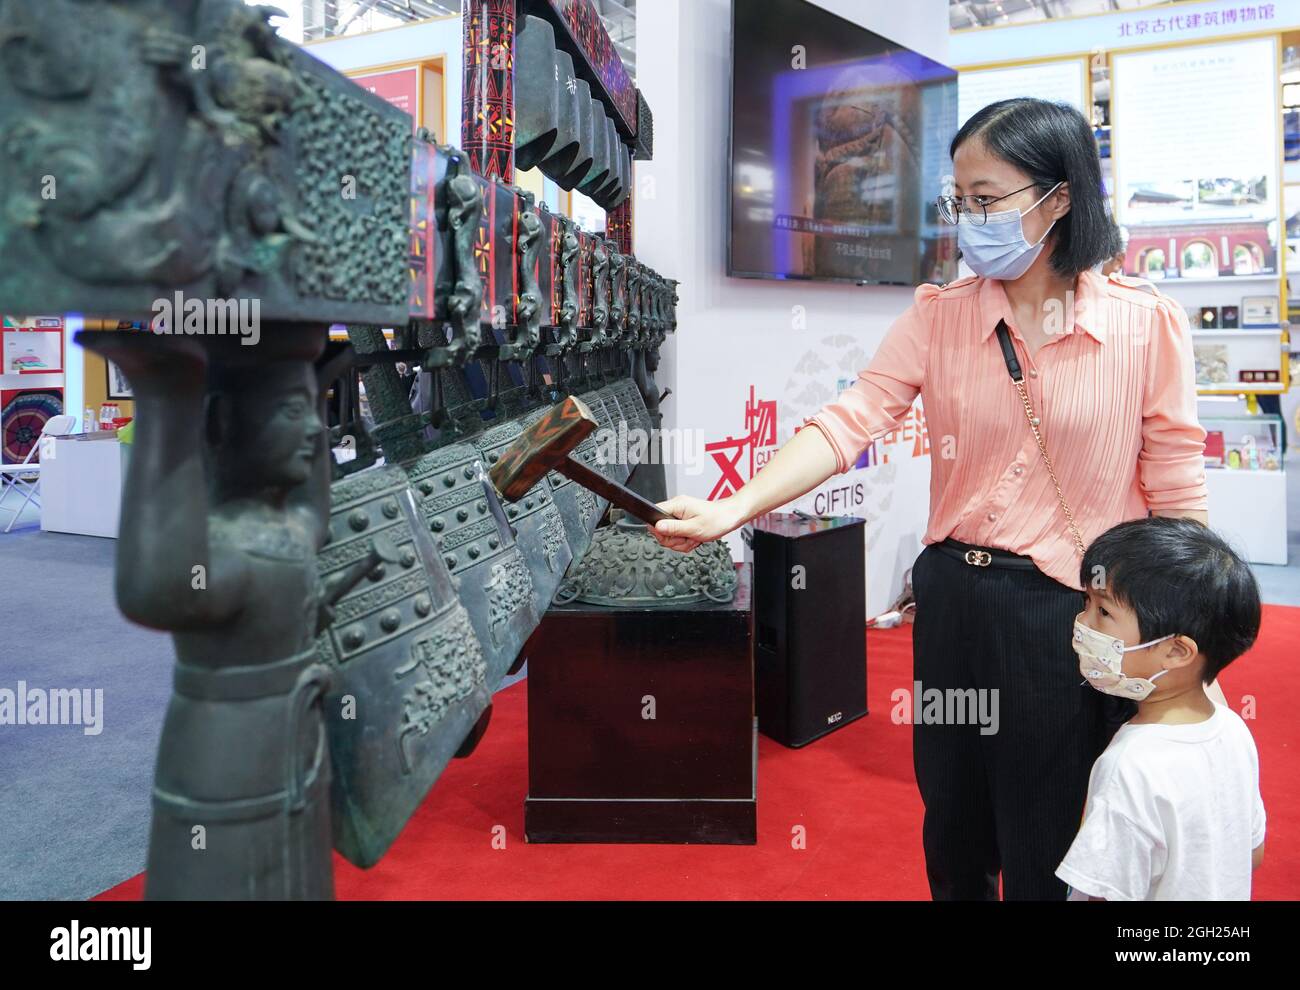 Beijing, China. 4th Sep, 2021. A visitor rings the duplicate of Zenghouyi bronze chime bell in cultural tourism services exhibition hall during the 2021 China International Fair for Trade in Services (CIFTIS) in Beijing, capital of China, Sept. 4, 2021. Credit: Chen Yehua/Xinhua/Alamy Live News Stock Photo